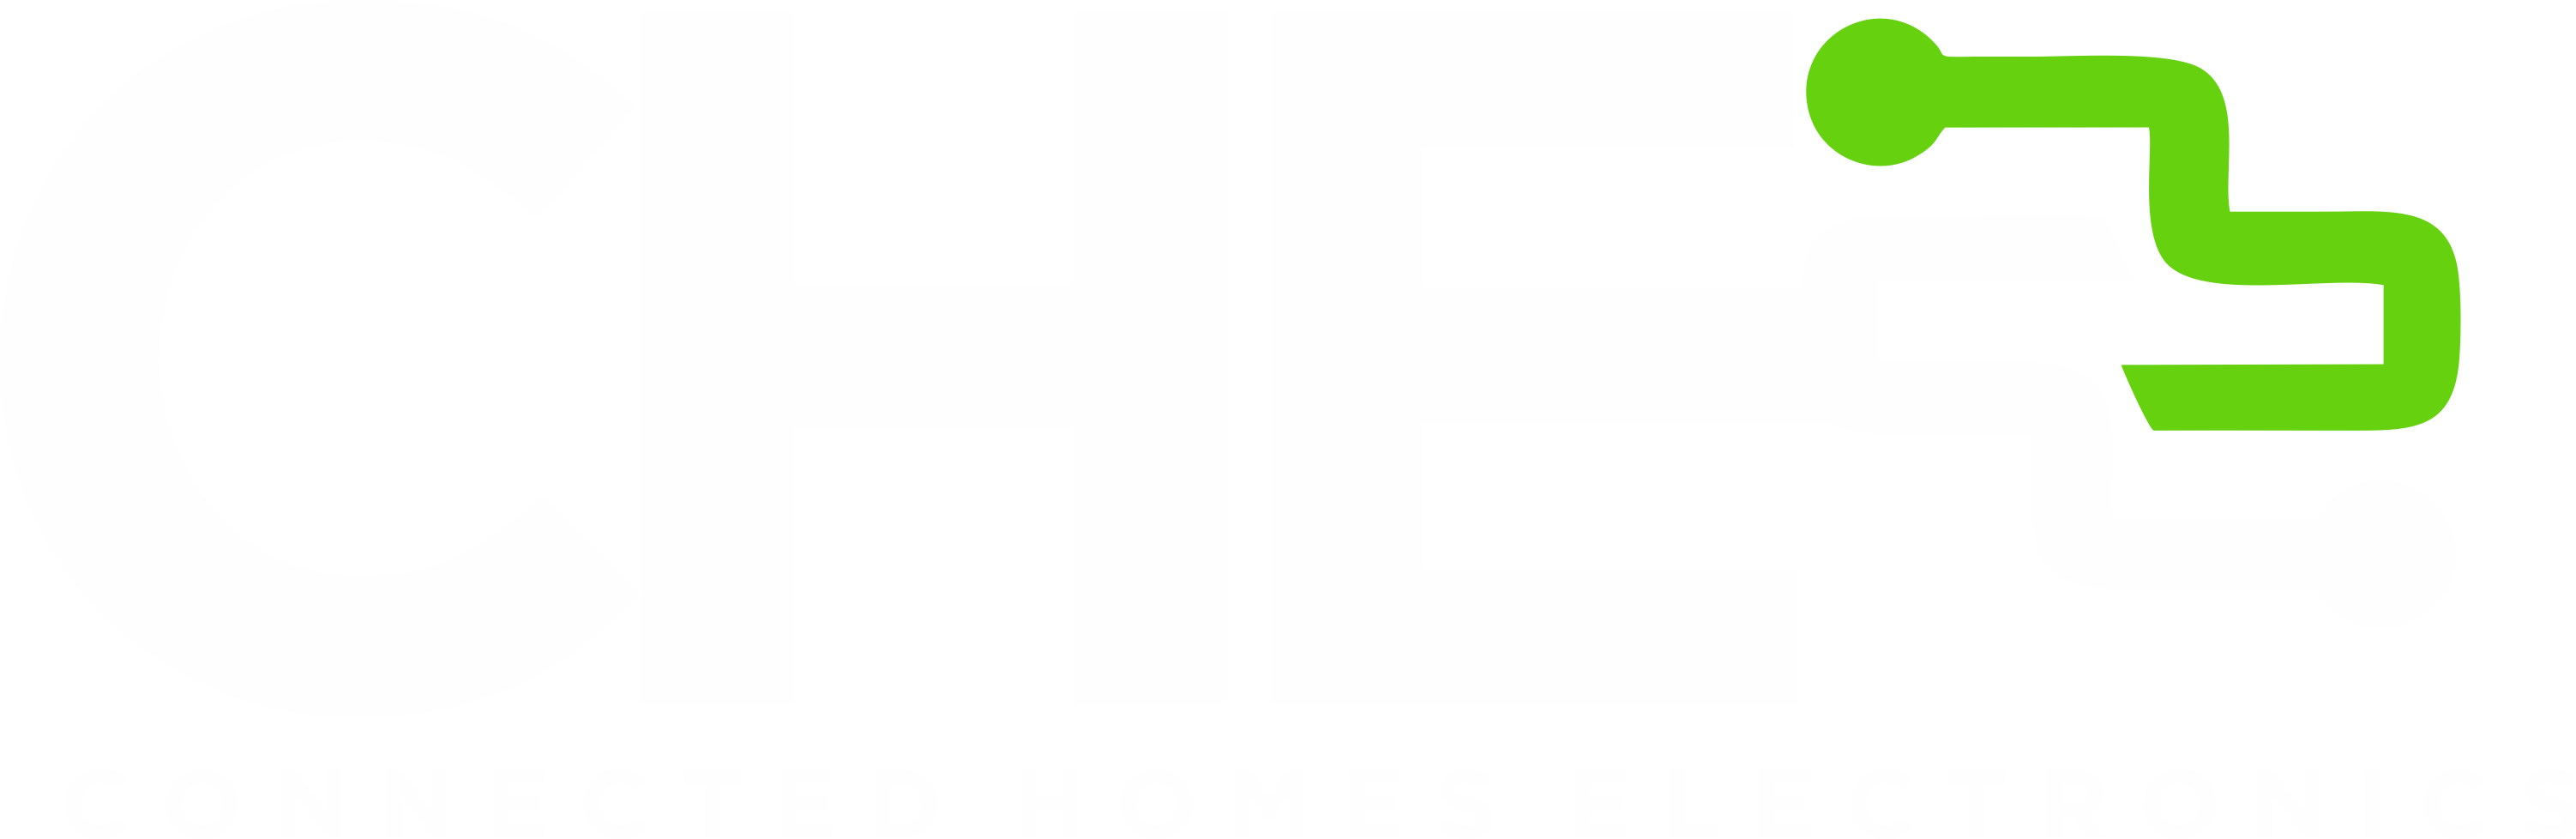 Connected Homes Electronics